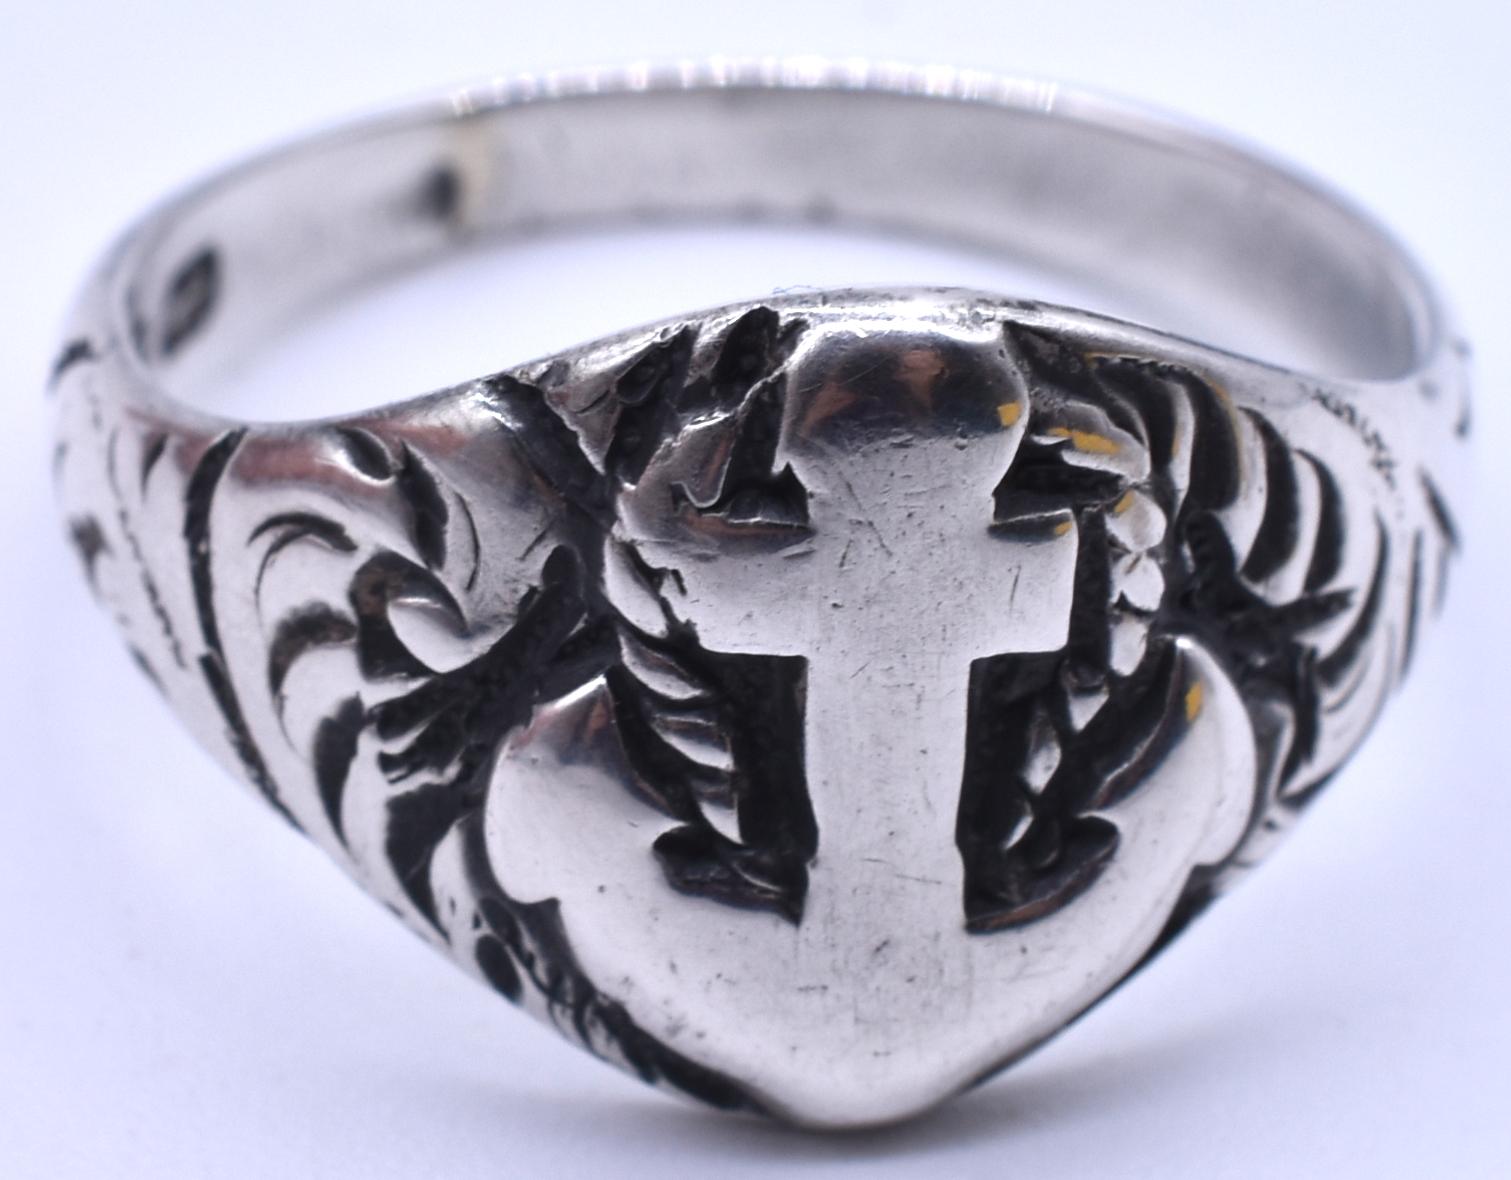 This substantial sterling silver ring has an anchor emblem at the center, a Victorian symbol of hope.  Appropriate for a man or woman and a well suited for a fisherman or sailor. Hallmarked Birmingham 1898, the ring is a size 8 3/4.